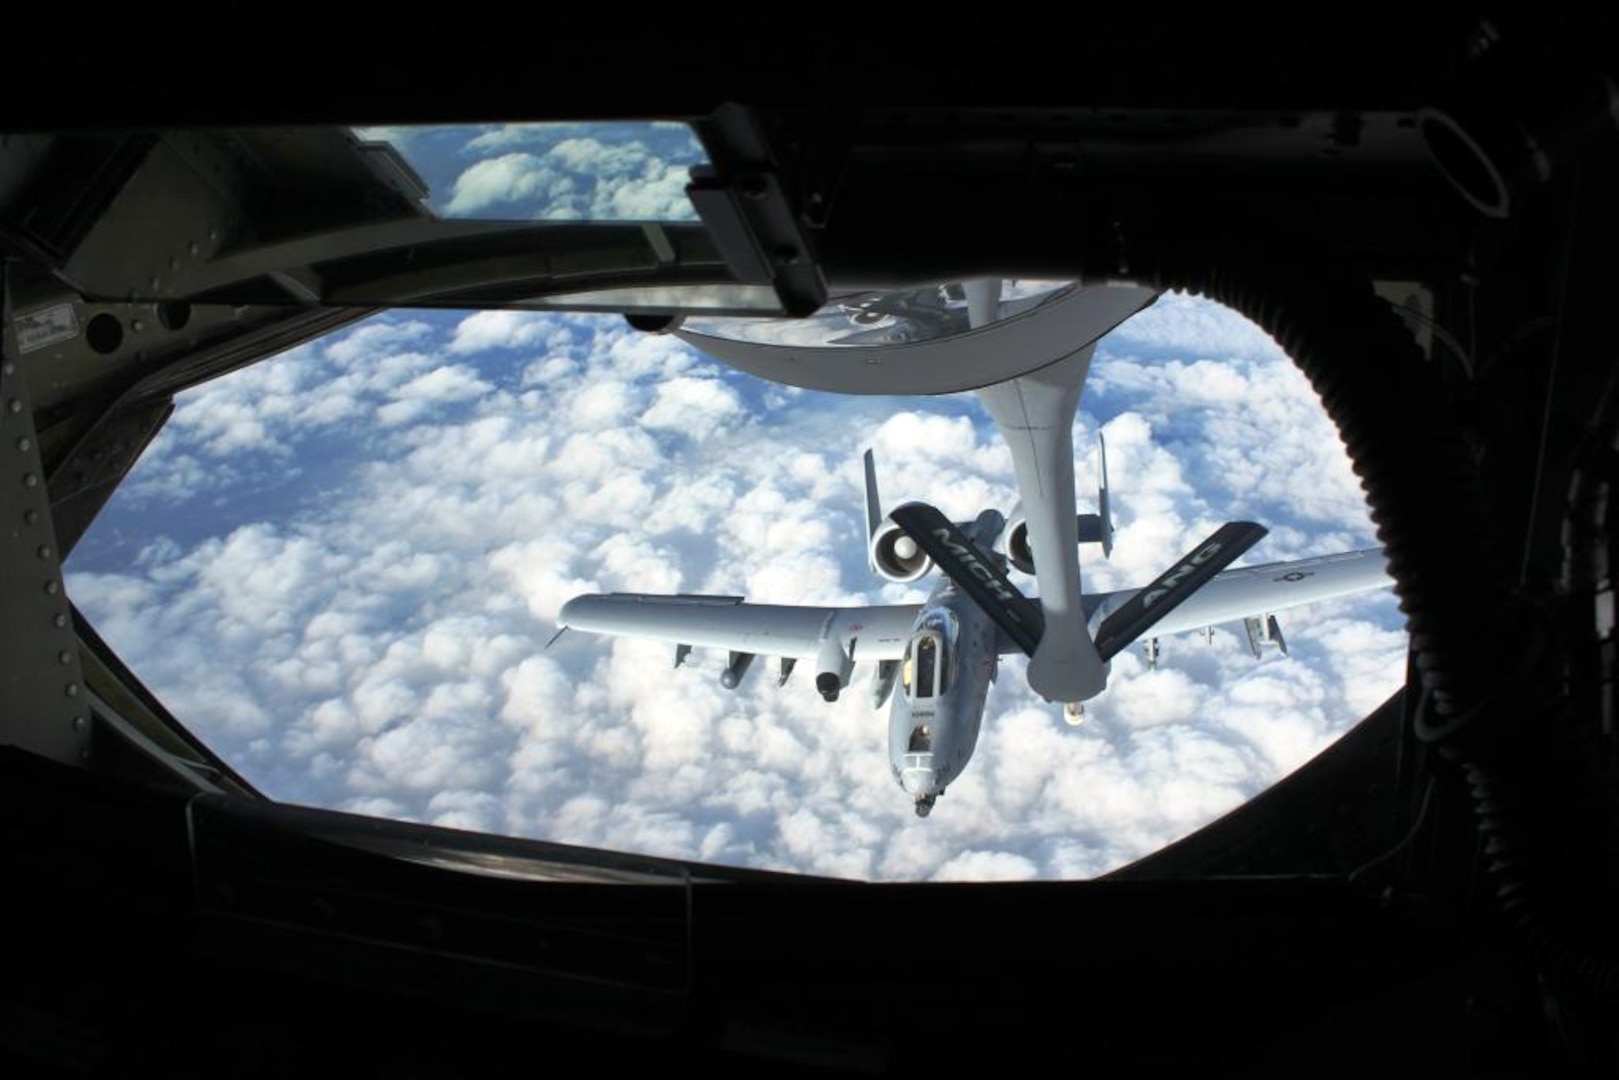 An A-10 Thunderbolt II moves into position to receive fuel from a KC-135 Stratotanker somewhere over the northeastern United States, Sept. 26, 2011. The A-10 is flown by a pilot from the 107th Fighter Squadron, which was traveling to a deployment in Afghanistan. The KC-135 was flown by a crew from the 171st Air Refueling Squadron. Both squadrons are part of the Michigan Air National Guard and are assigned to Selfridge Air National Guard Base, Mich.